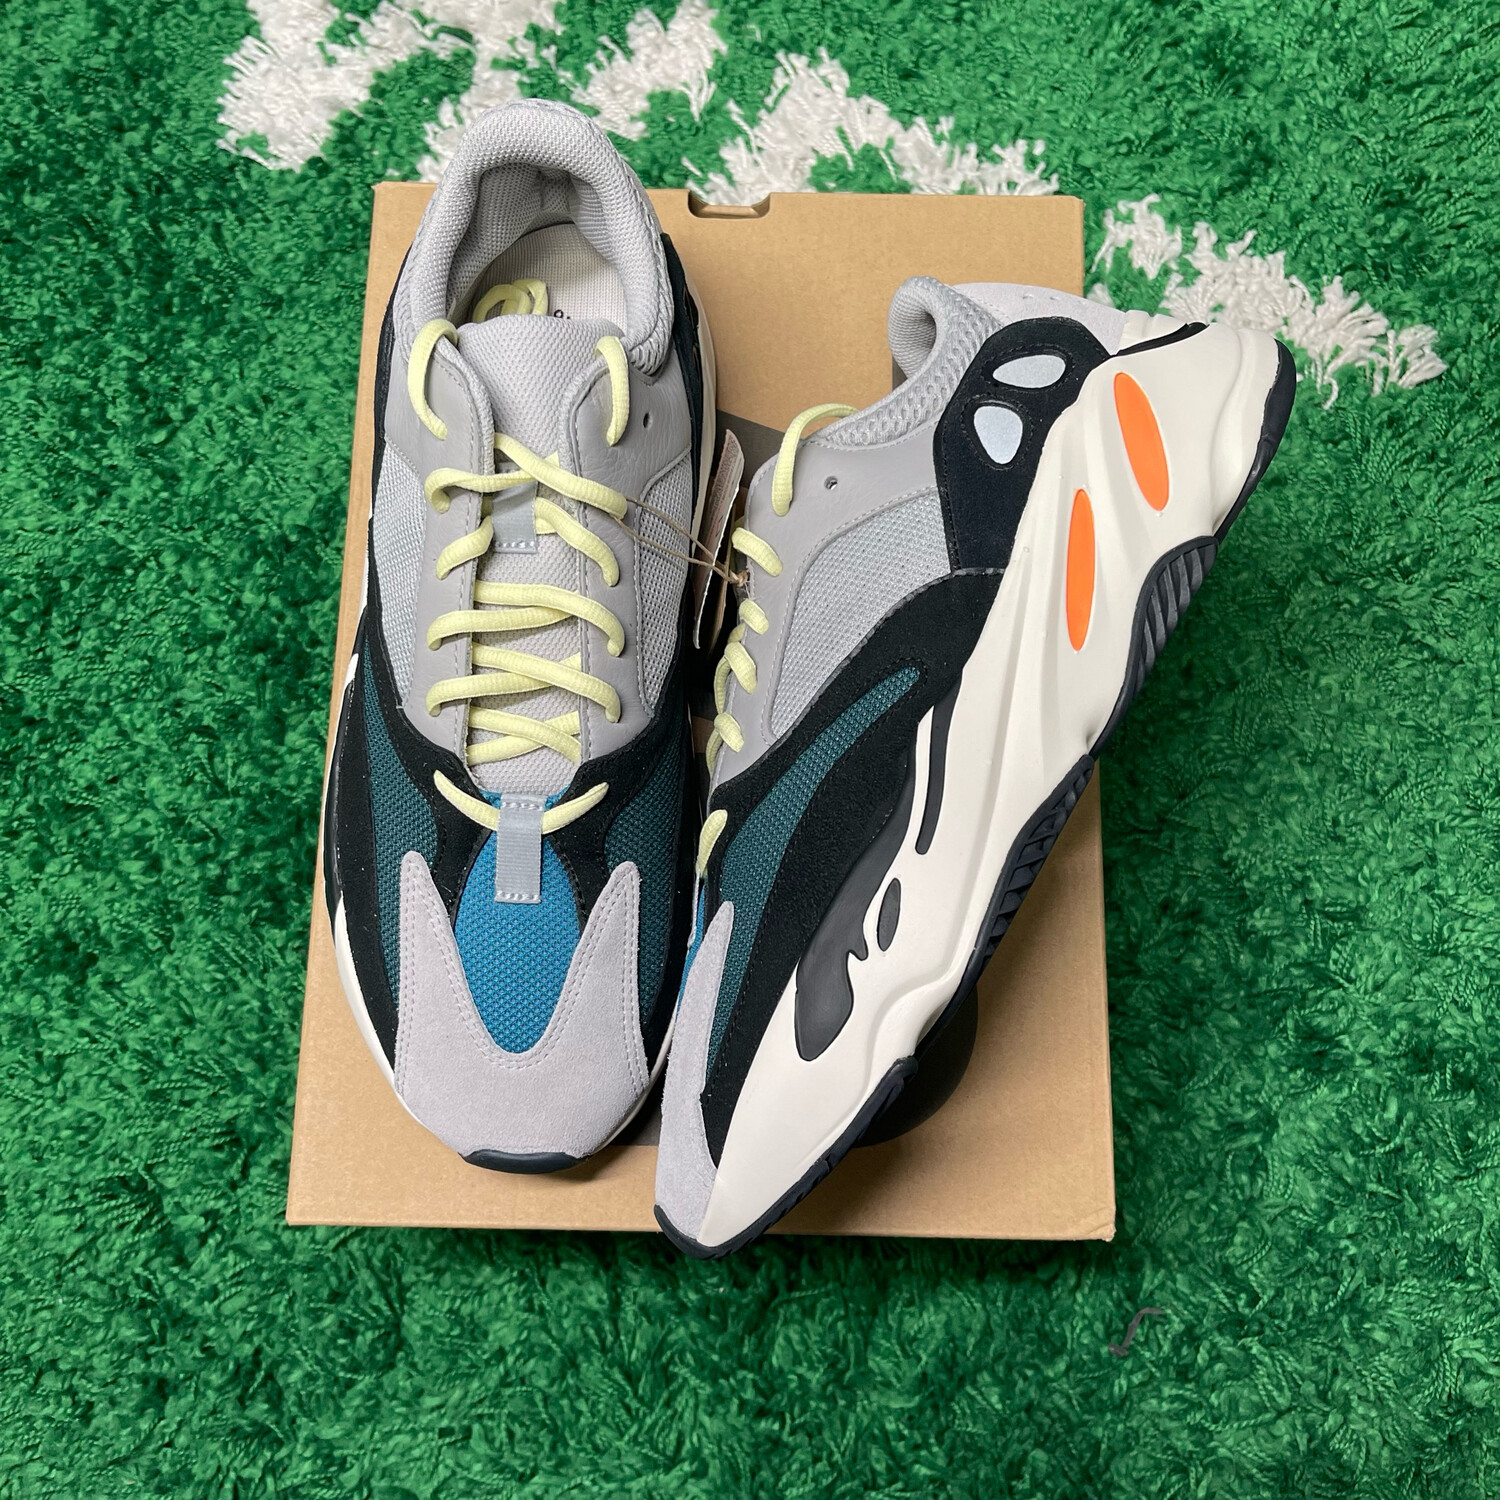 adidas Yeezy Boost 700 Wave Runner Solid Grey Size 12